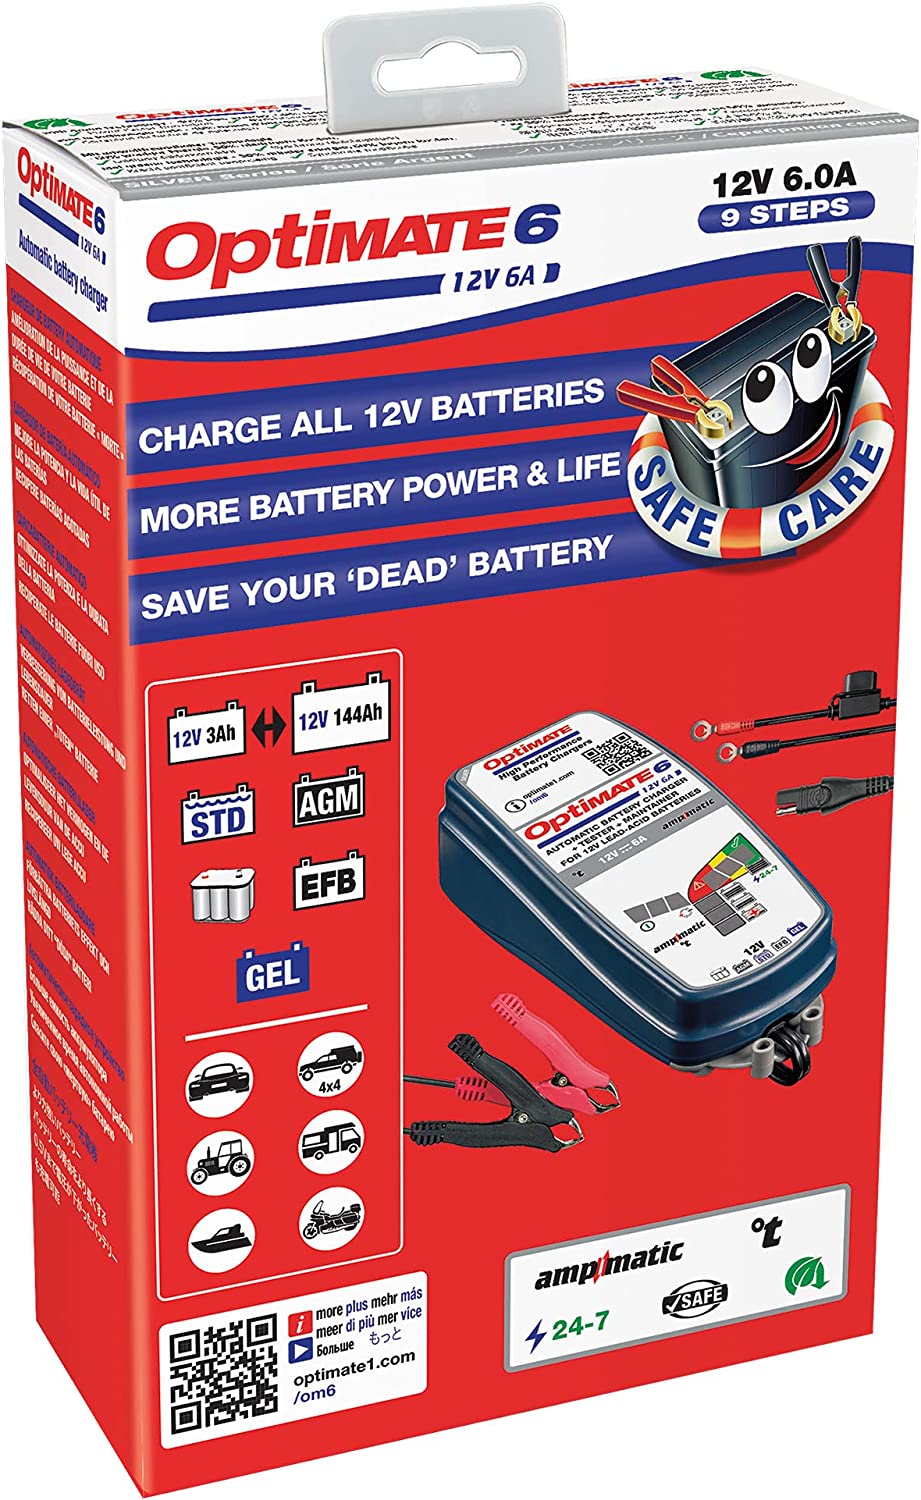 Tecmate TM-361 | OPTIMATE 6 AMPMATIC (V2) SILVER 9 STEP AUTOMATIC BATTERY SAVING CHARGER, TESTER & MAINTAINER